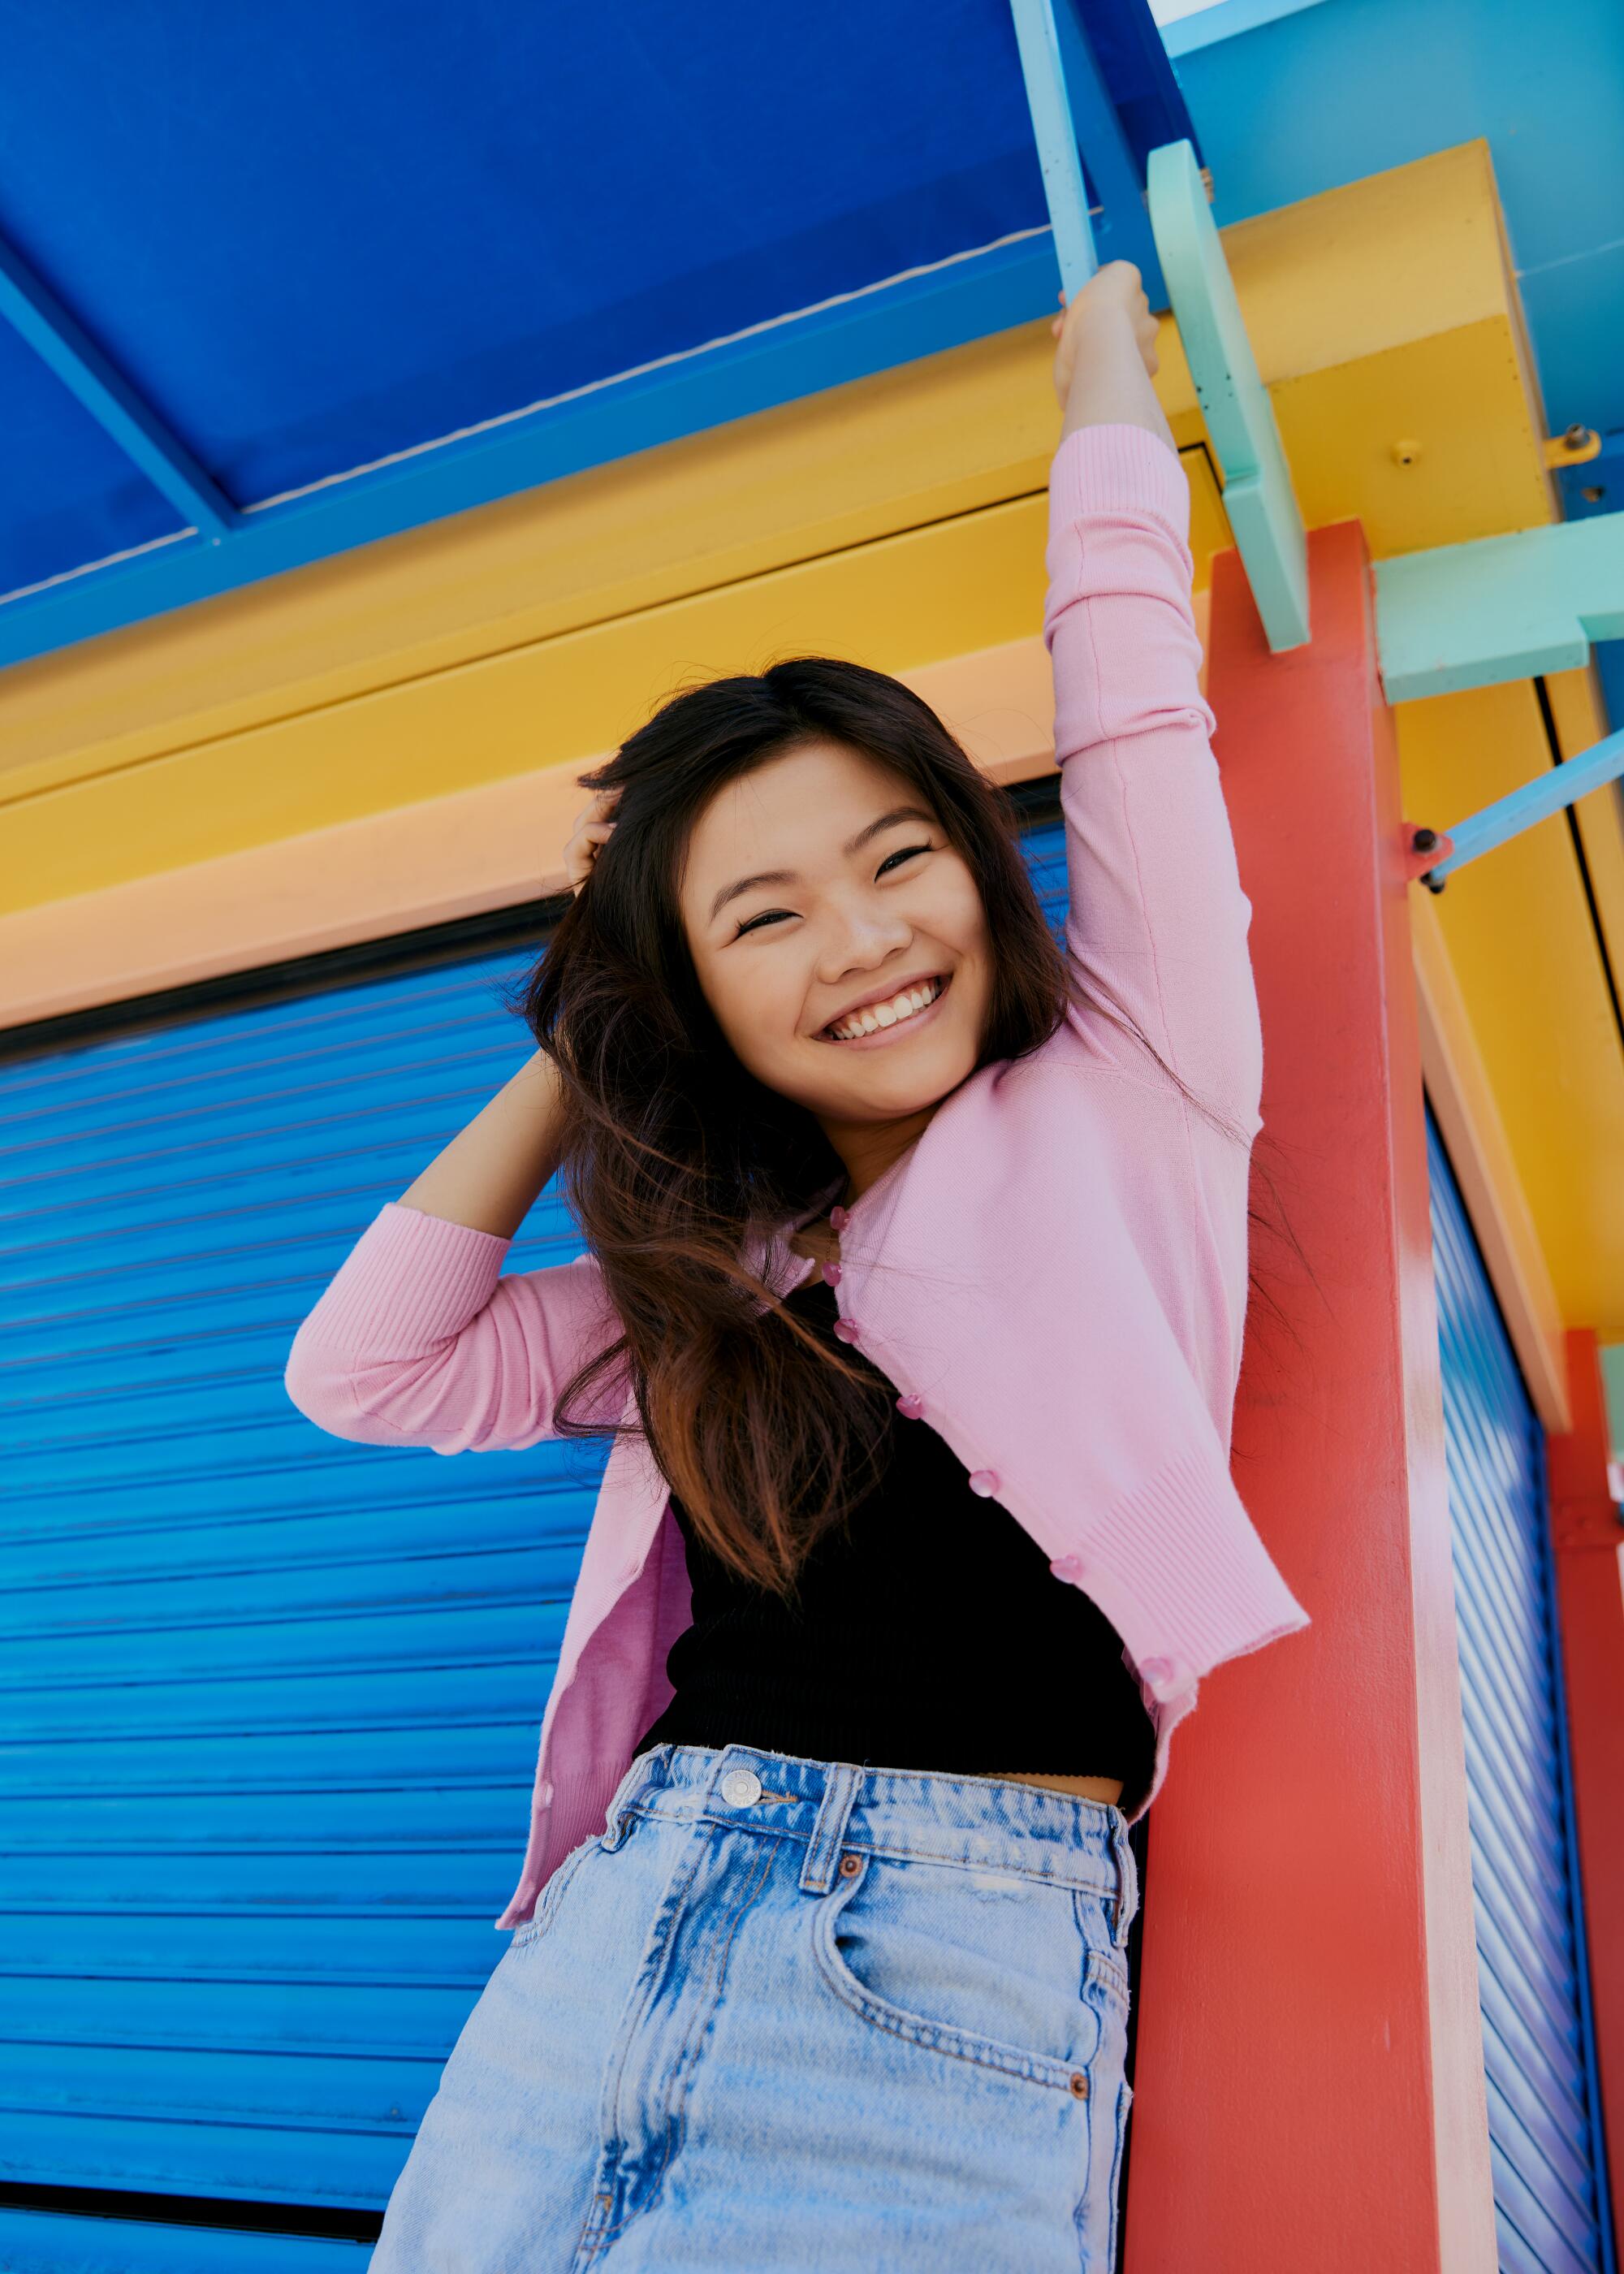 Miya Cech smiles against a colorful structure in Little Tokyo.